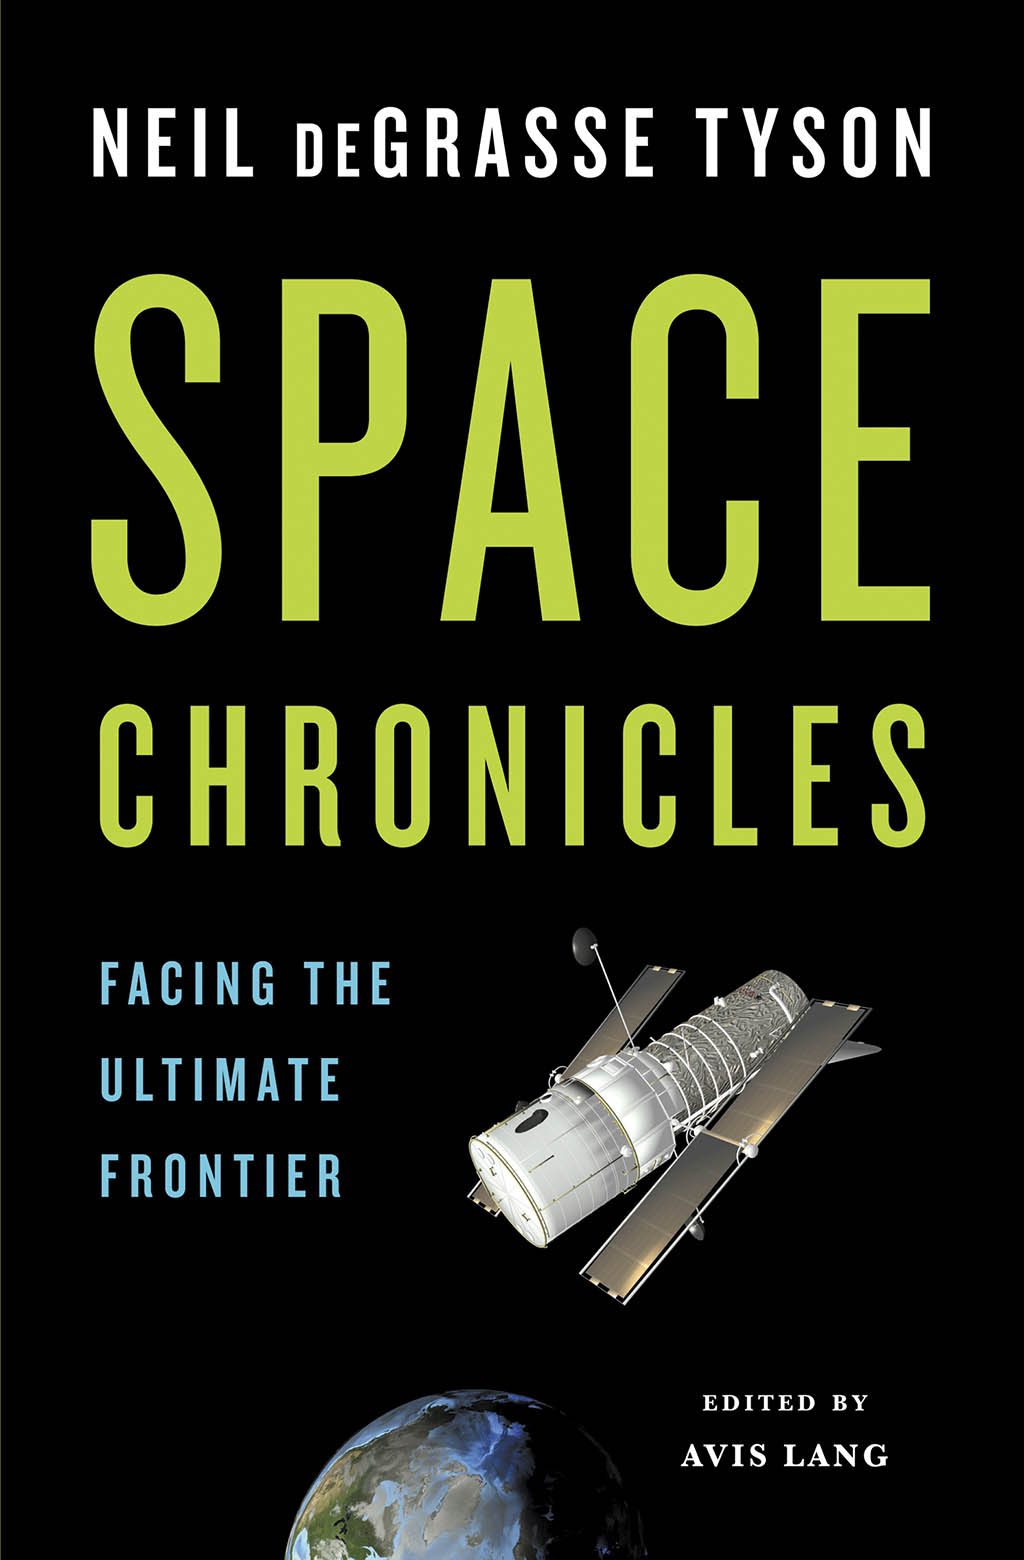 Link to the book Space Chronicles by Neil deGrasse Tyson, edited by Avis Lang.